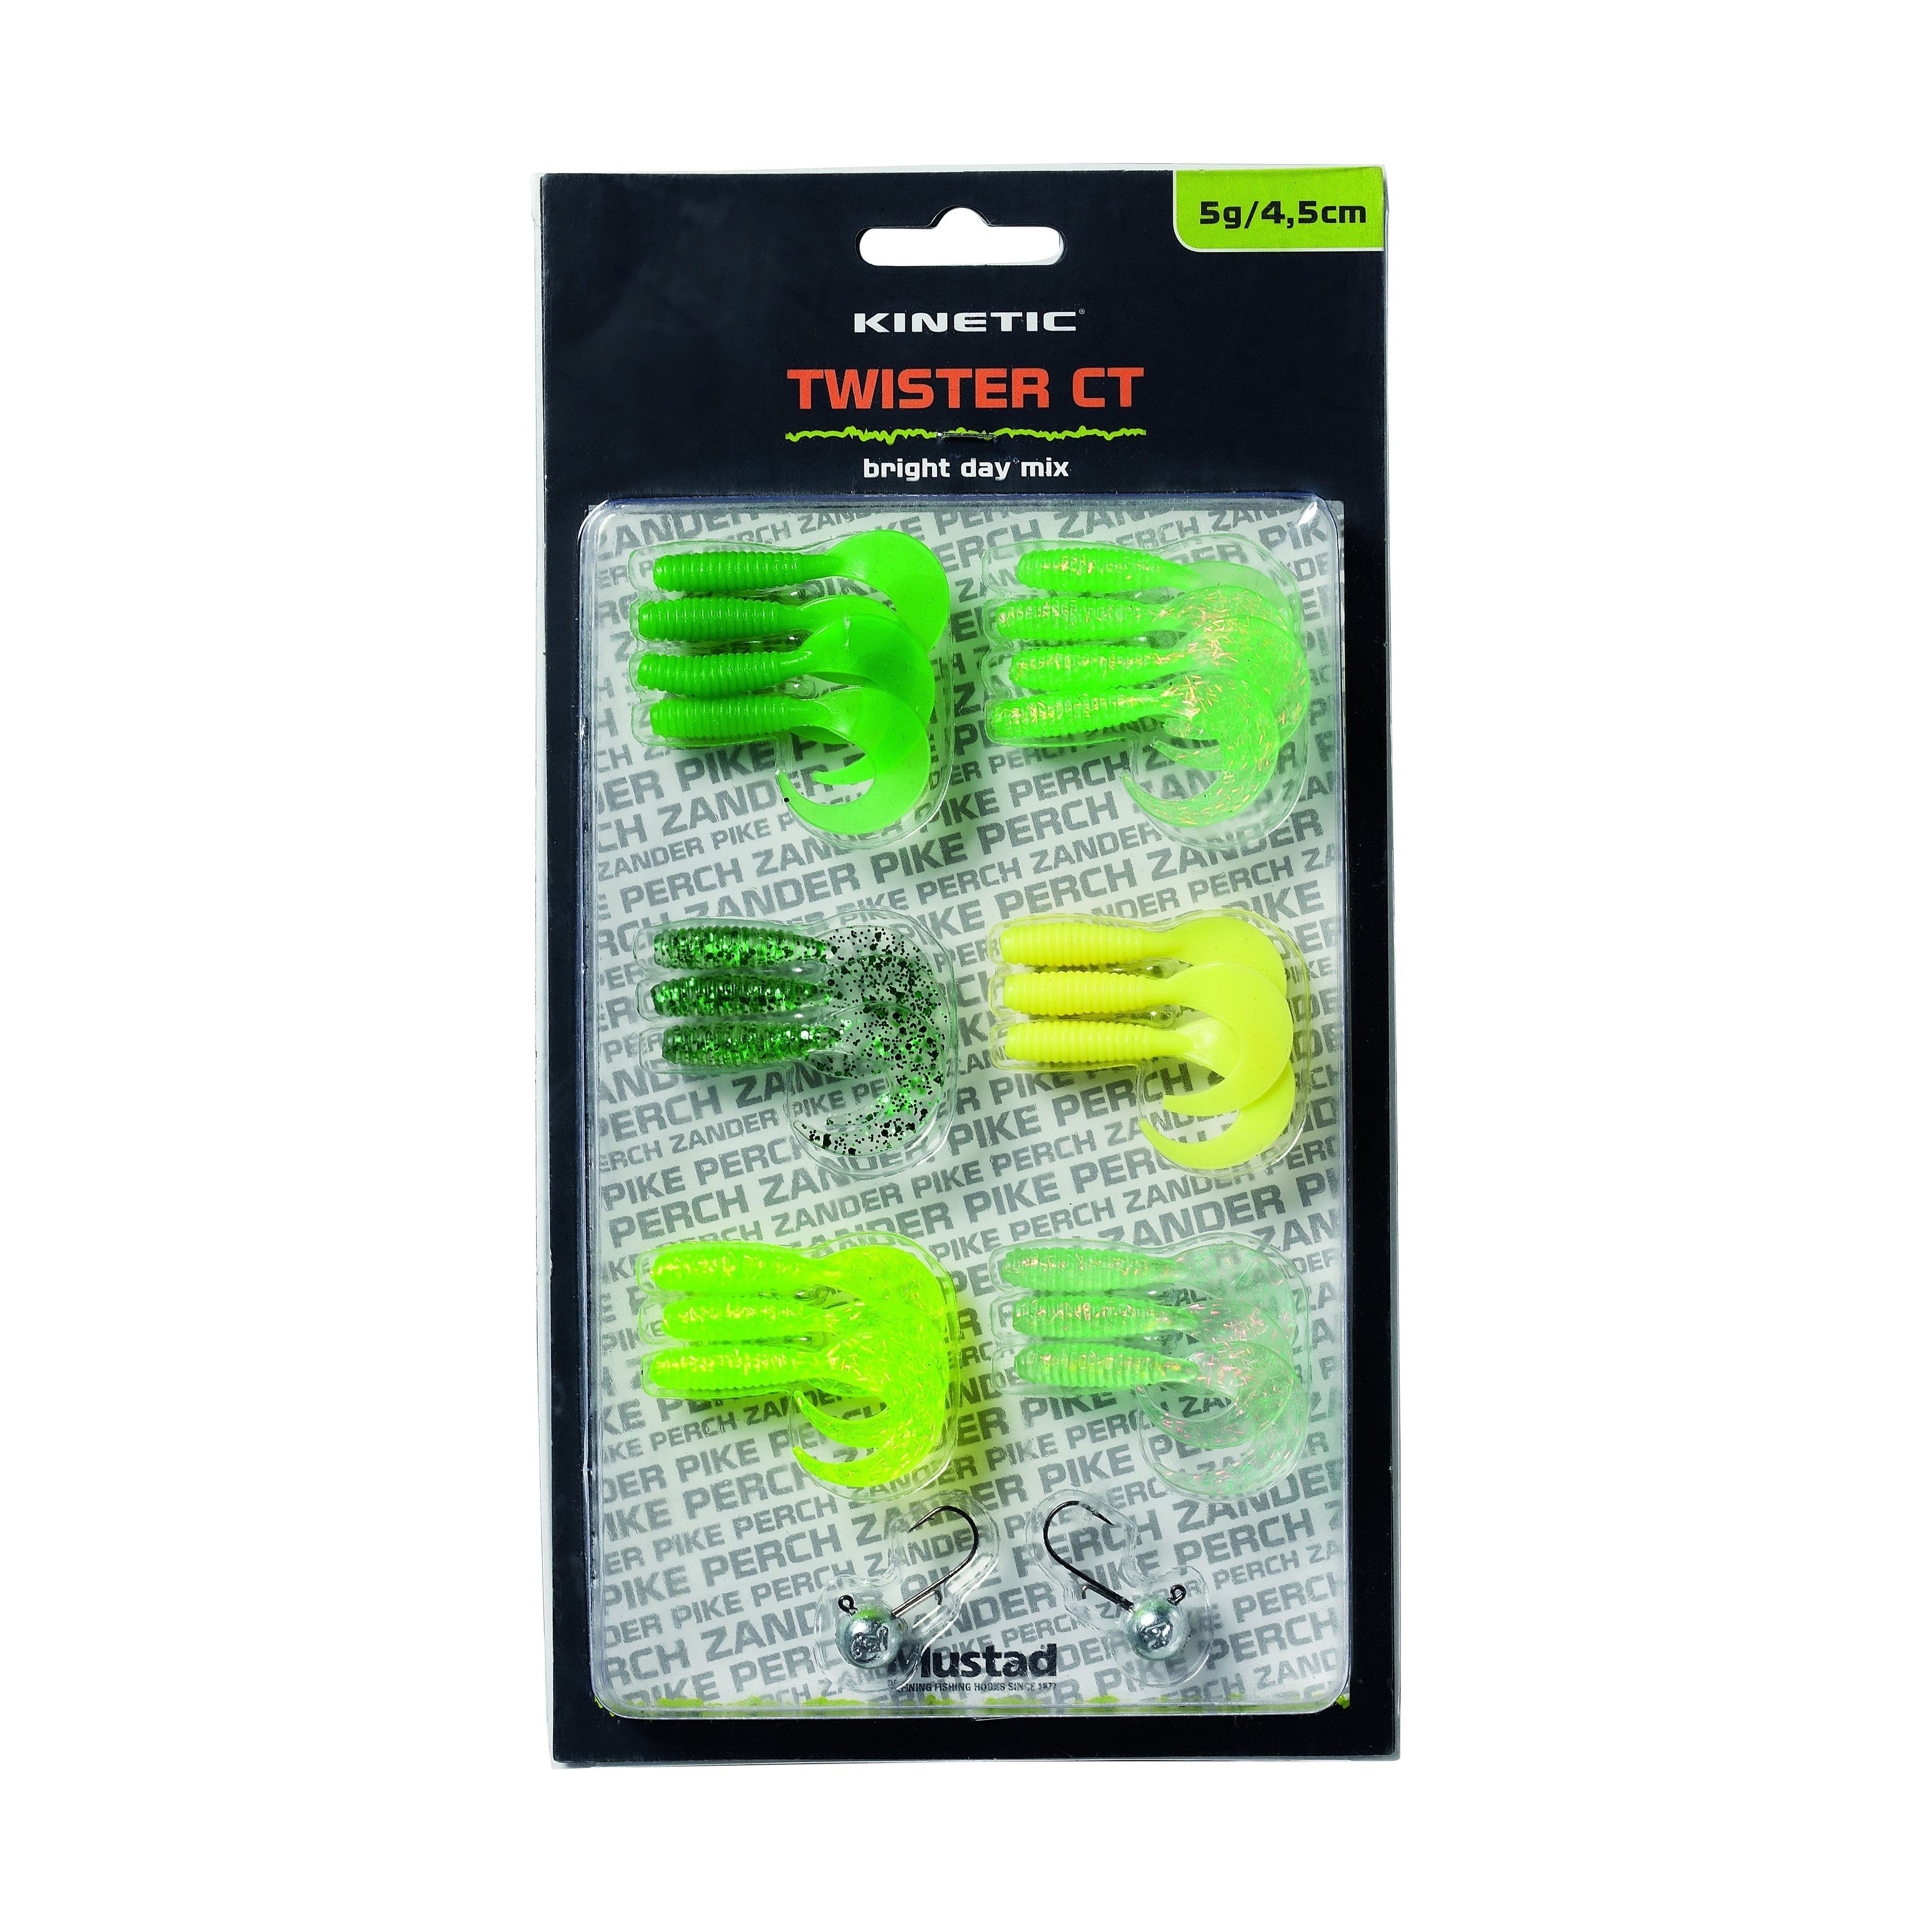 Kinetic Twister Ct 5G 4.5cm Bright Day Mix